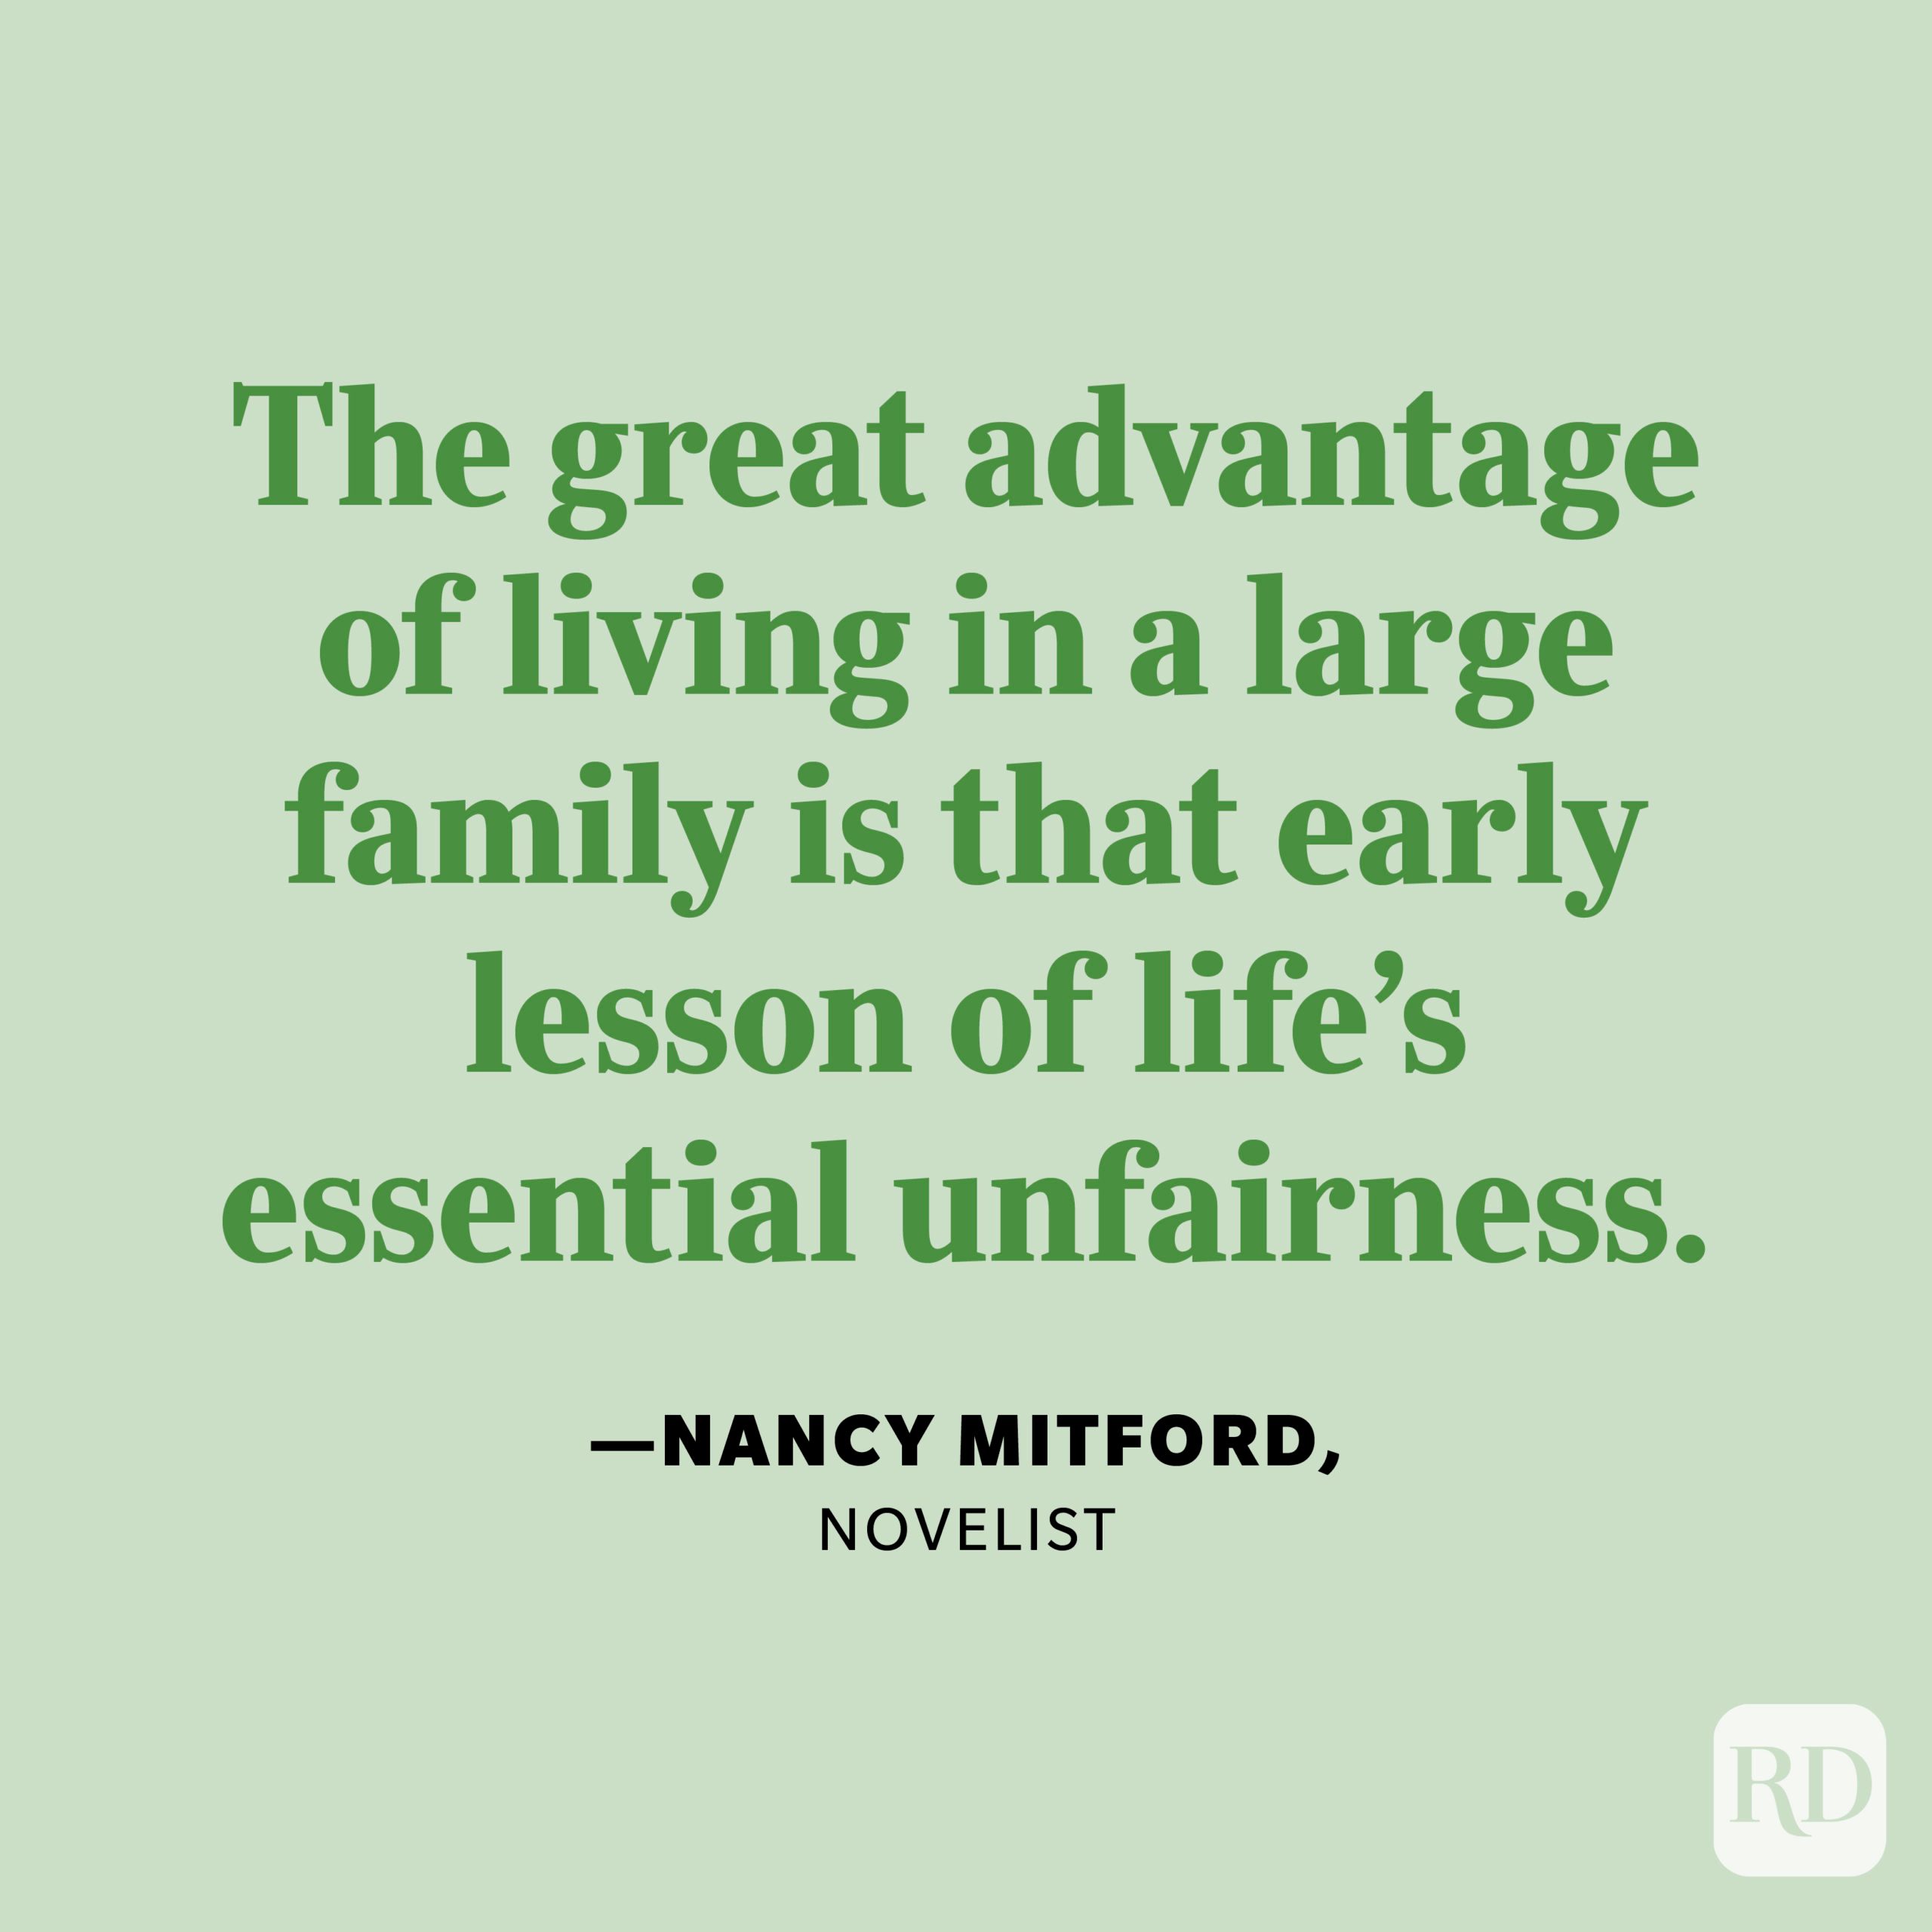 "The great advantage of living in a large family is that early lesson of life's essential unfairness." —Nancy Mitford, novelist